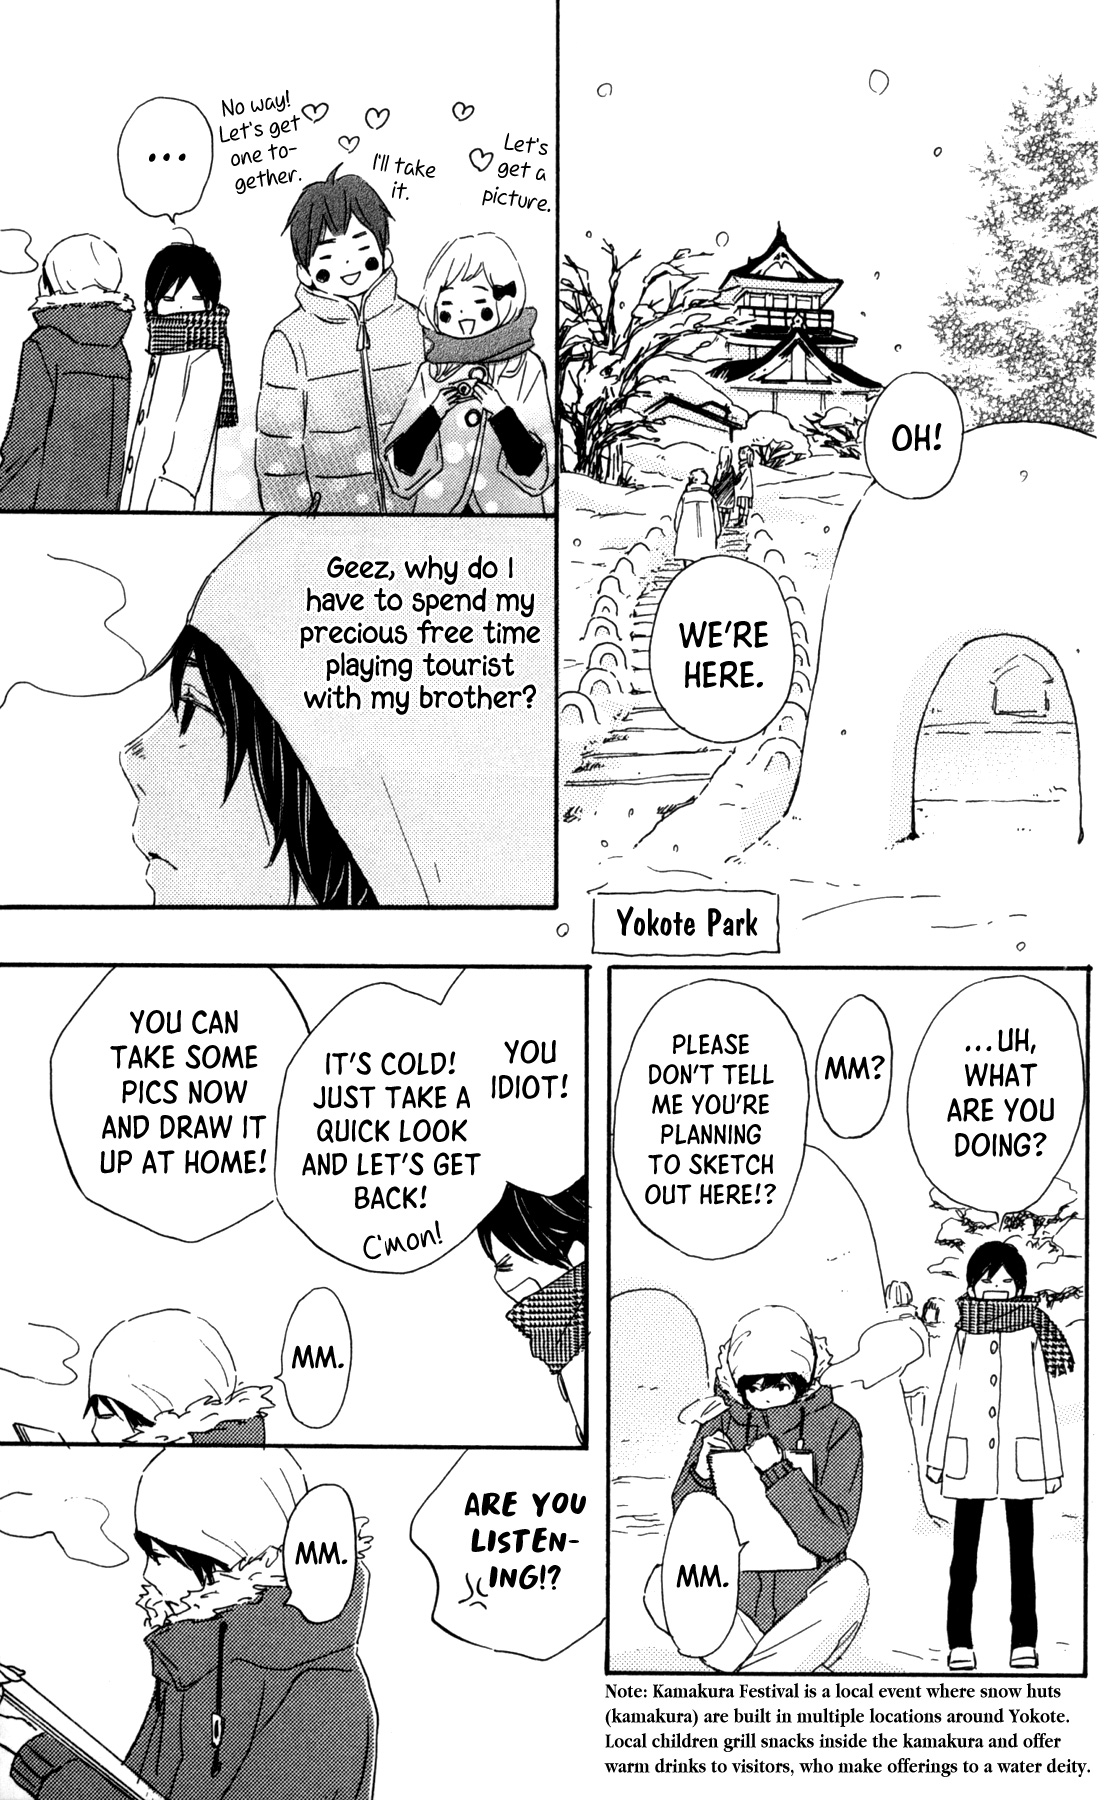 Star Child Vol. 1 Ch. 7 The Sleeping Girl in the Woods